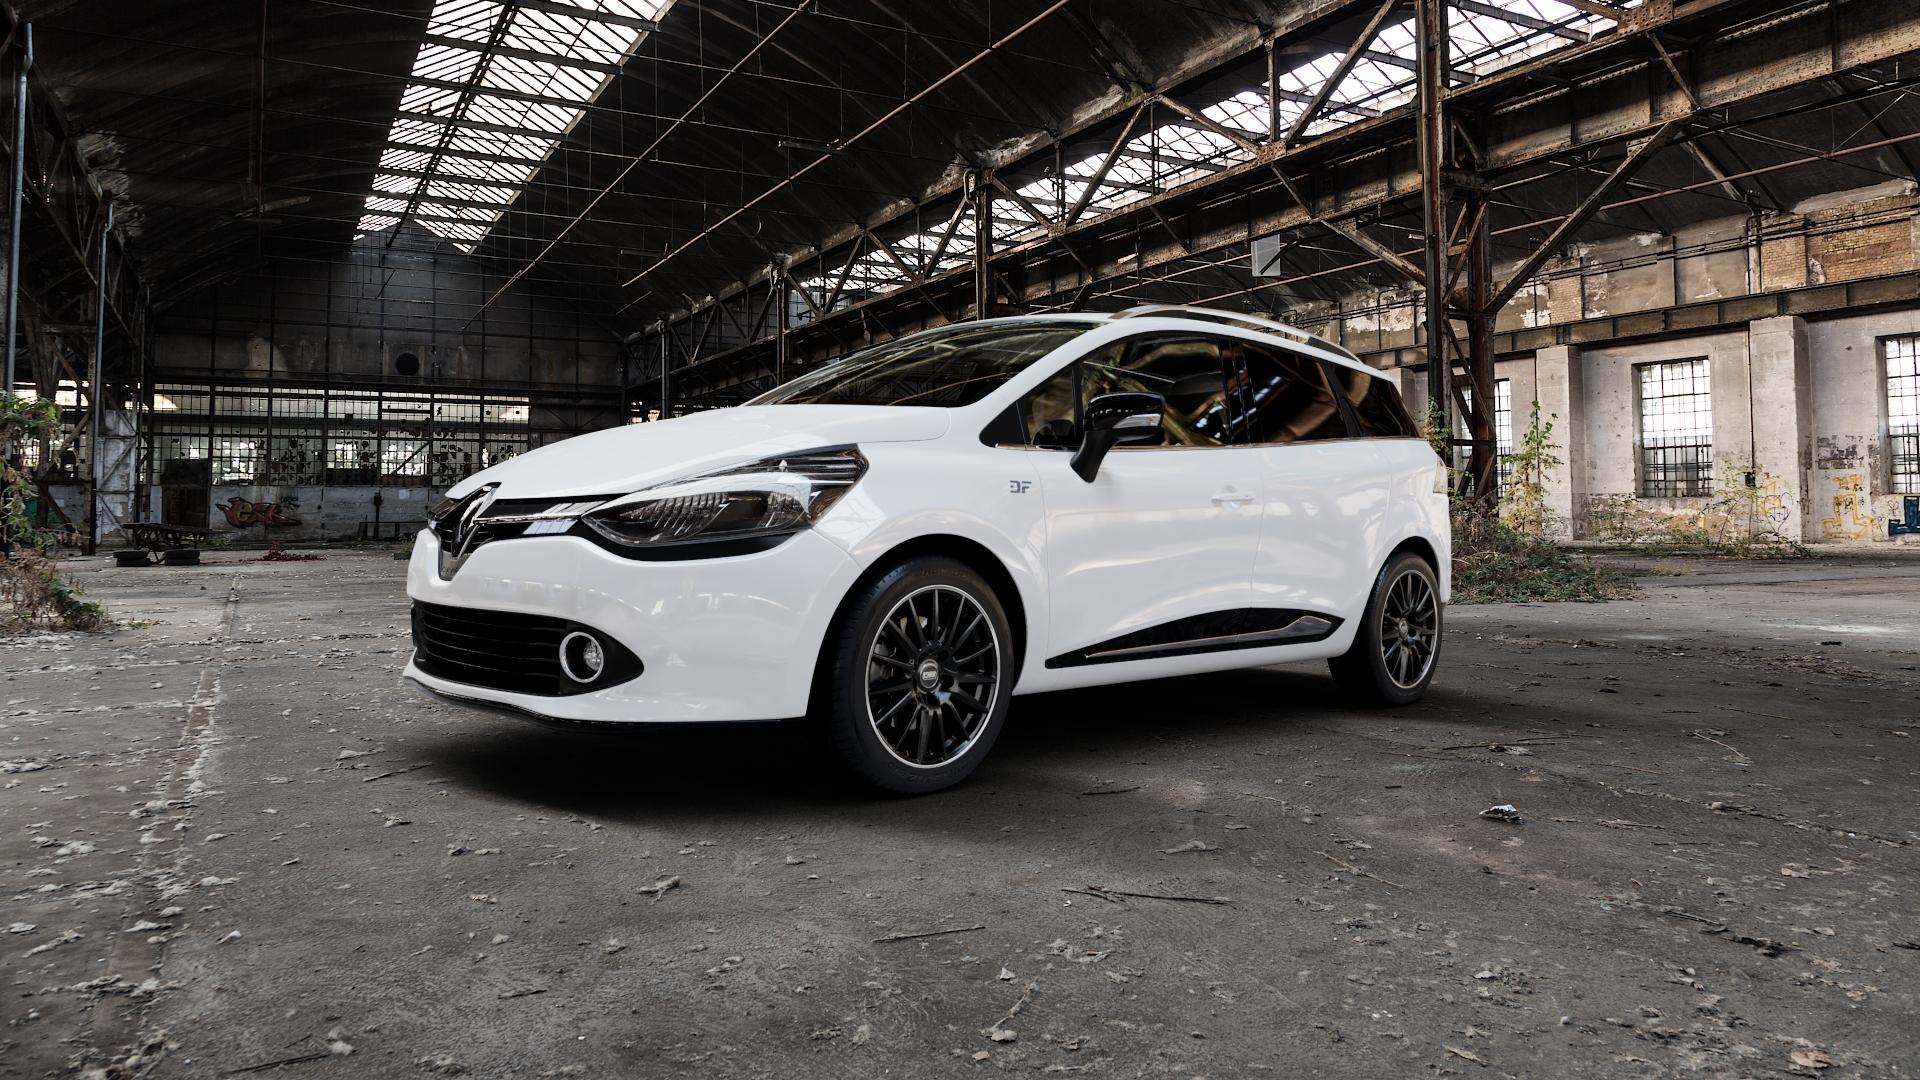 Renault Clio IV Grandtour Type R 1,2l TCe 120 EDC 88kW (120 hp) Wheels and  Tyre Packages | velonity.com